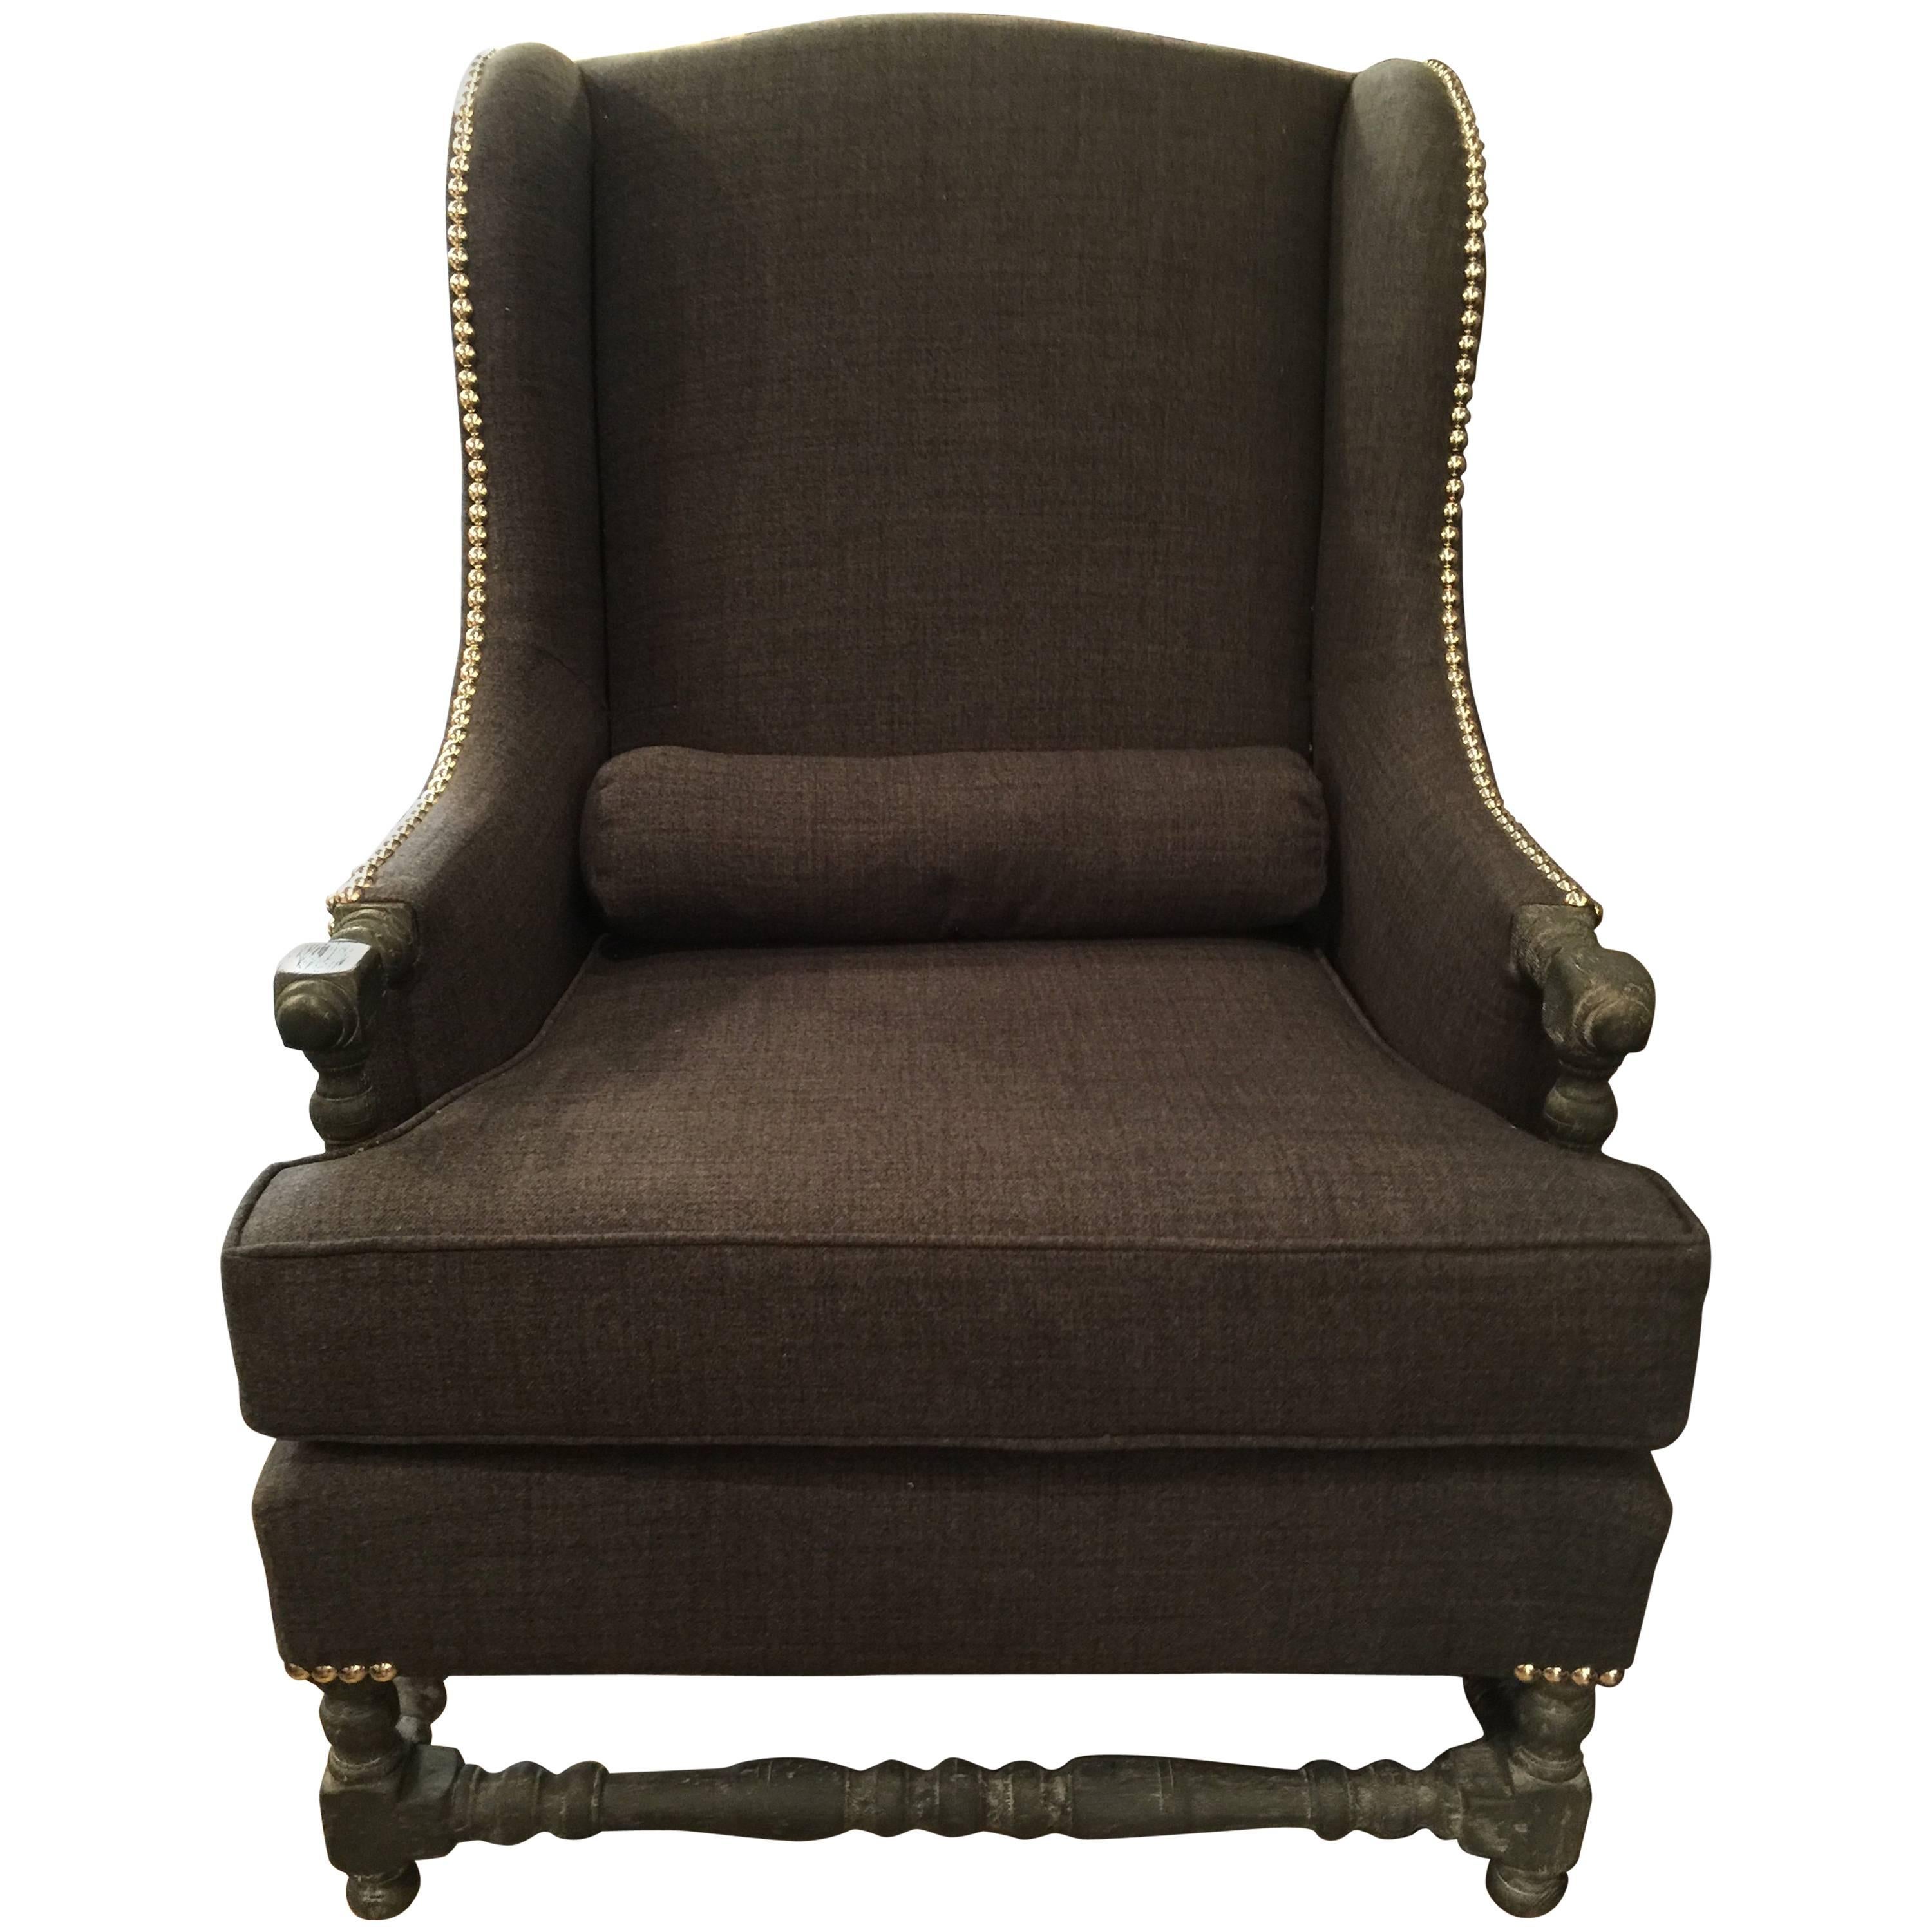 Early 20th Century French Upholstered Wing Chair For Sale